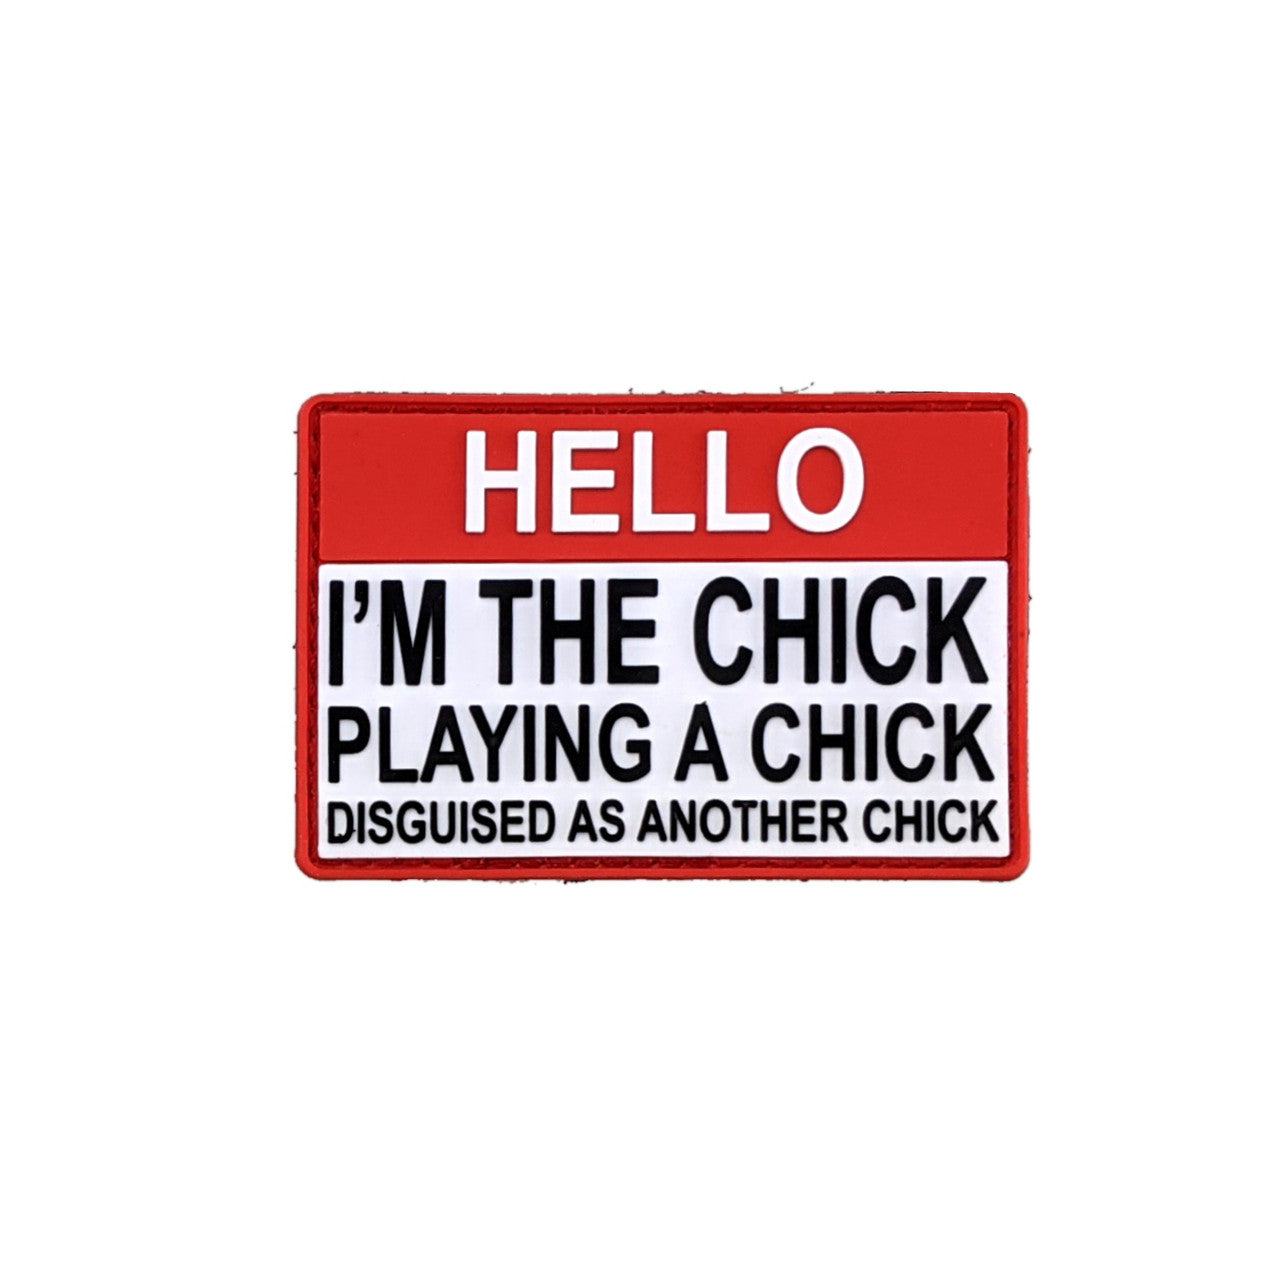 TIC Patch - I'M THE CHICK R&W